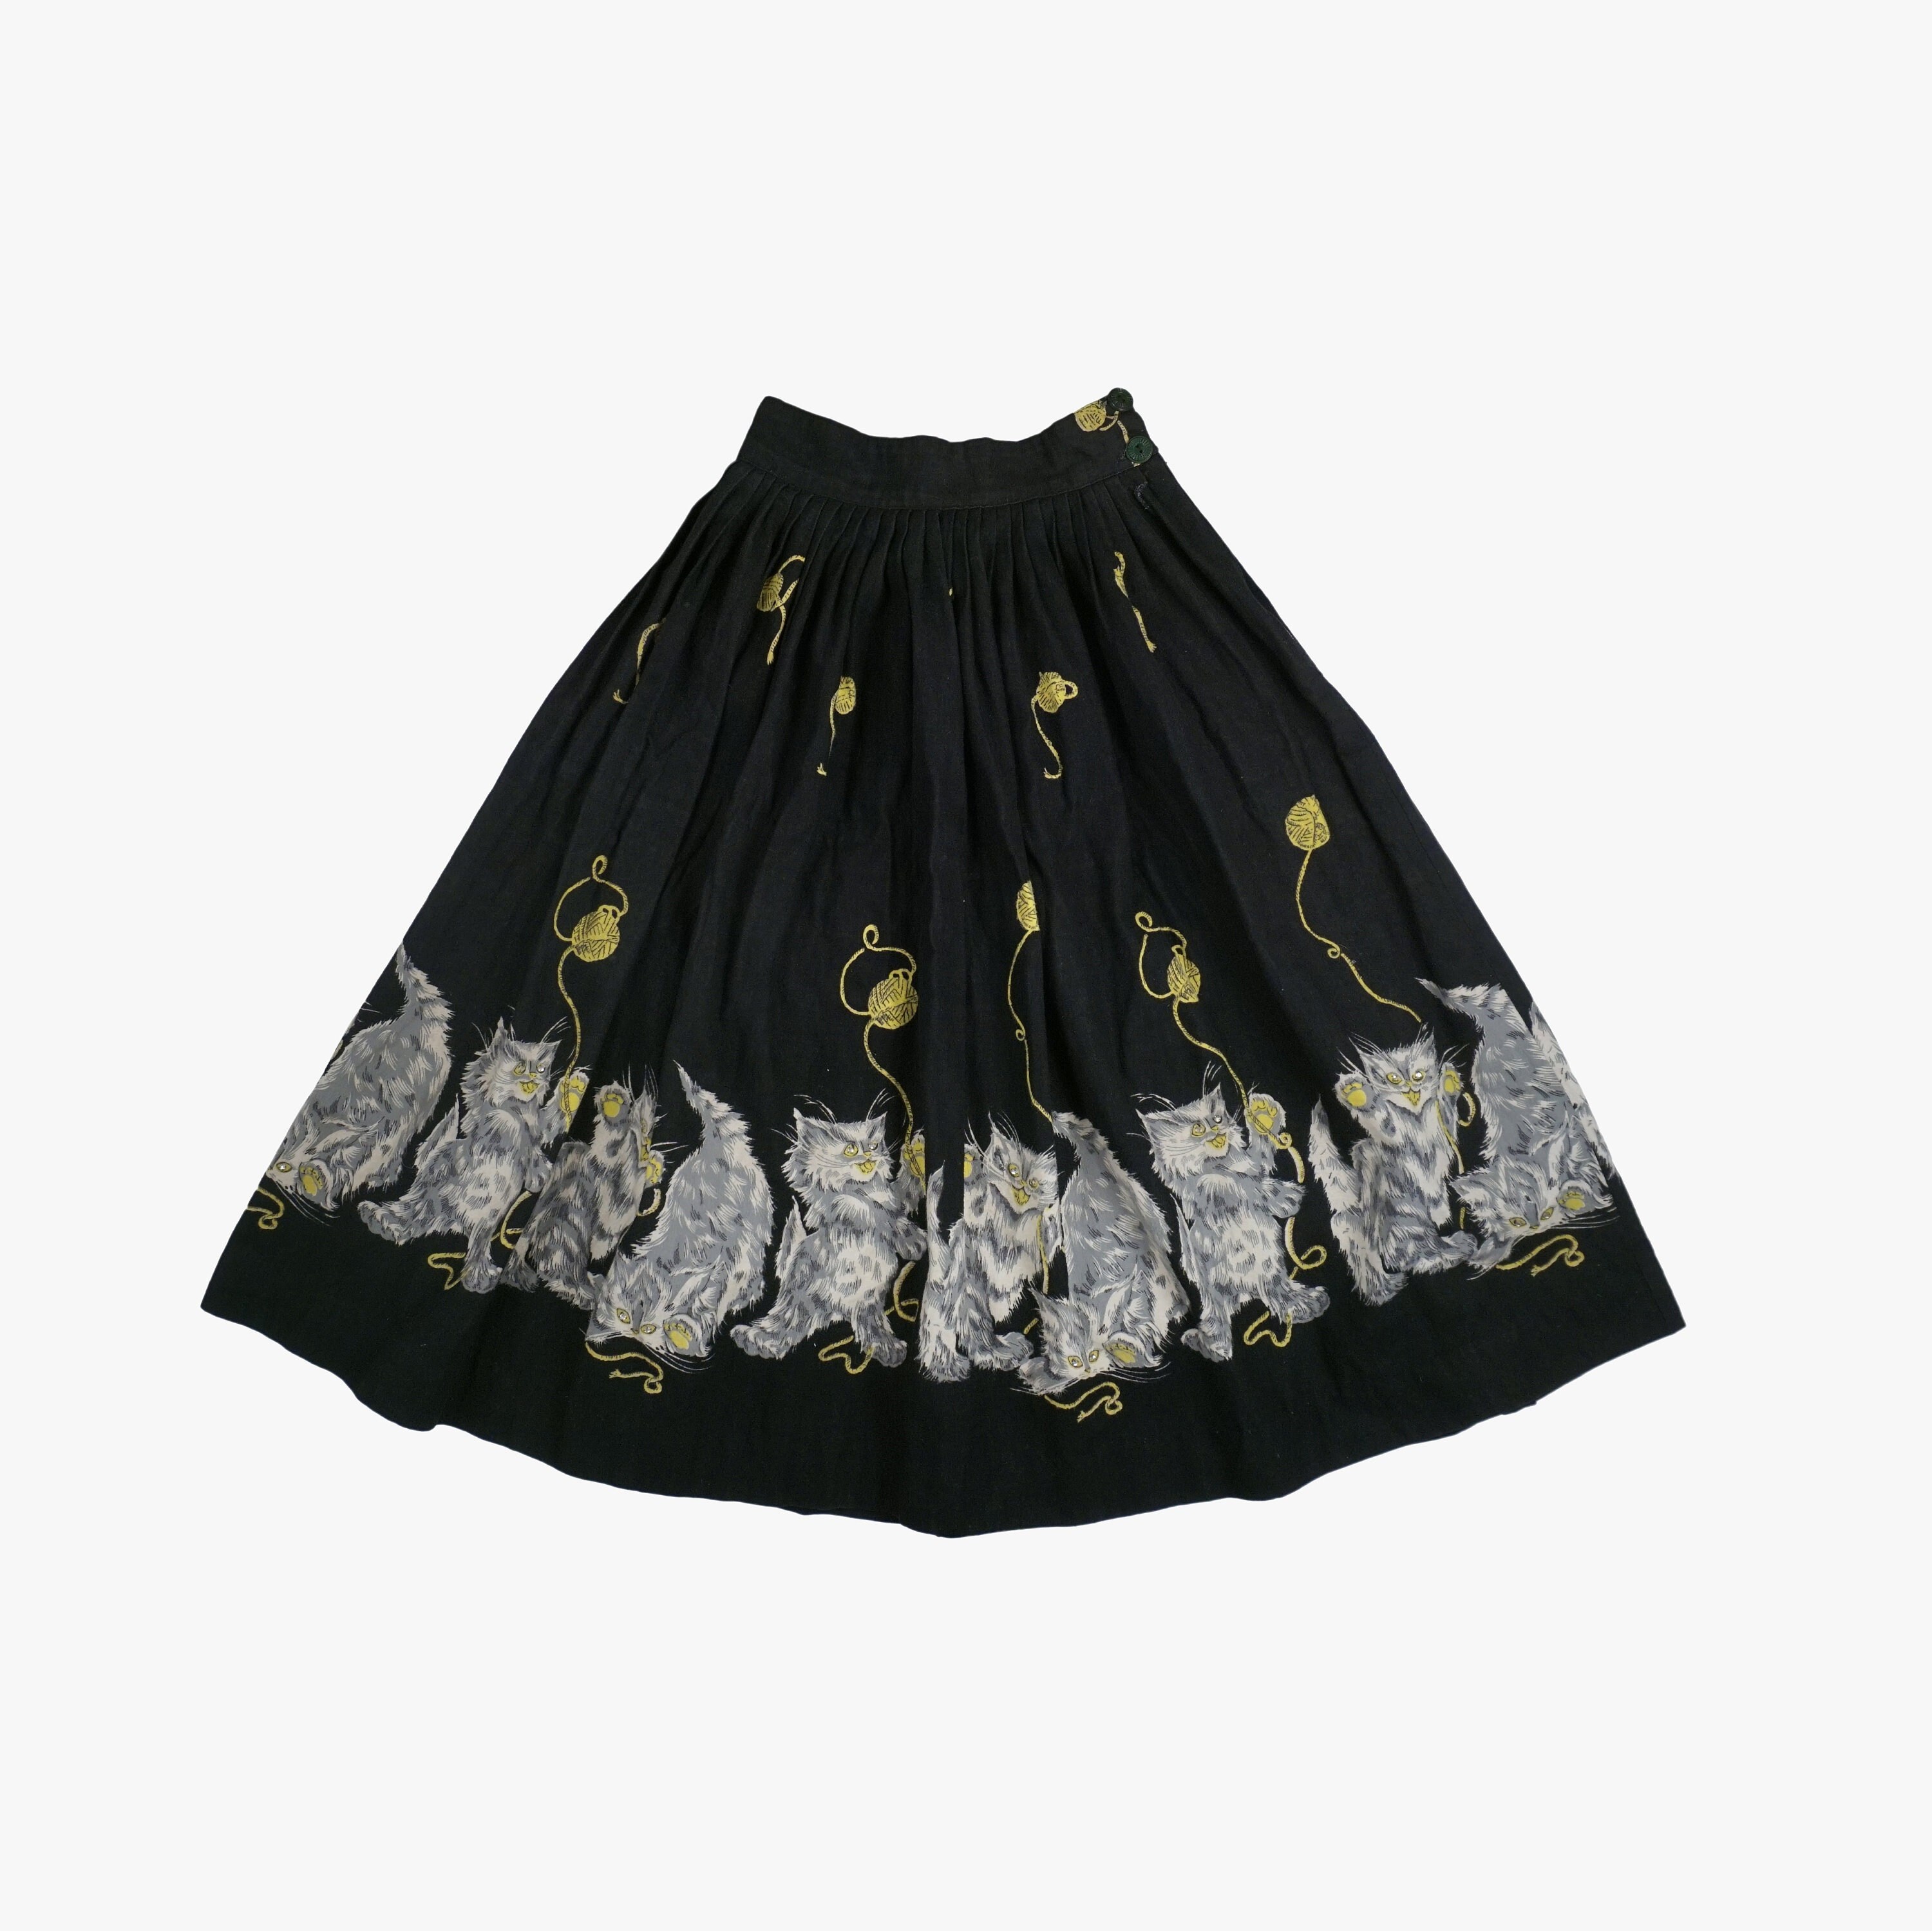 Vintage 1950s Novelty Quilted Black Circle Skirt w/Gold Lurex Flowers XS